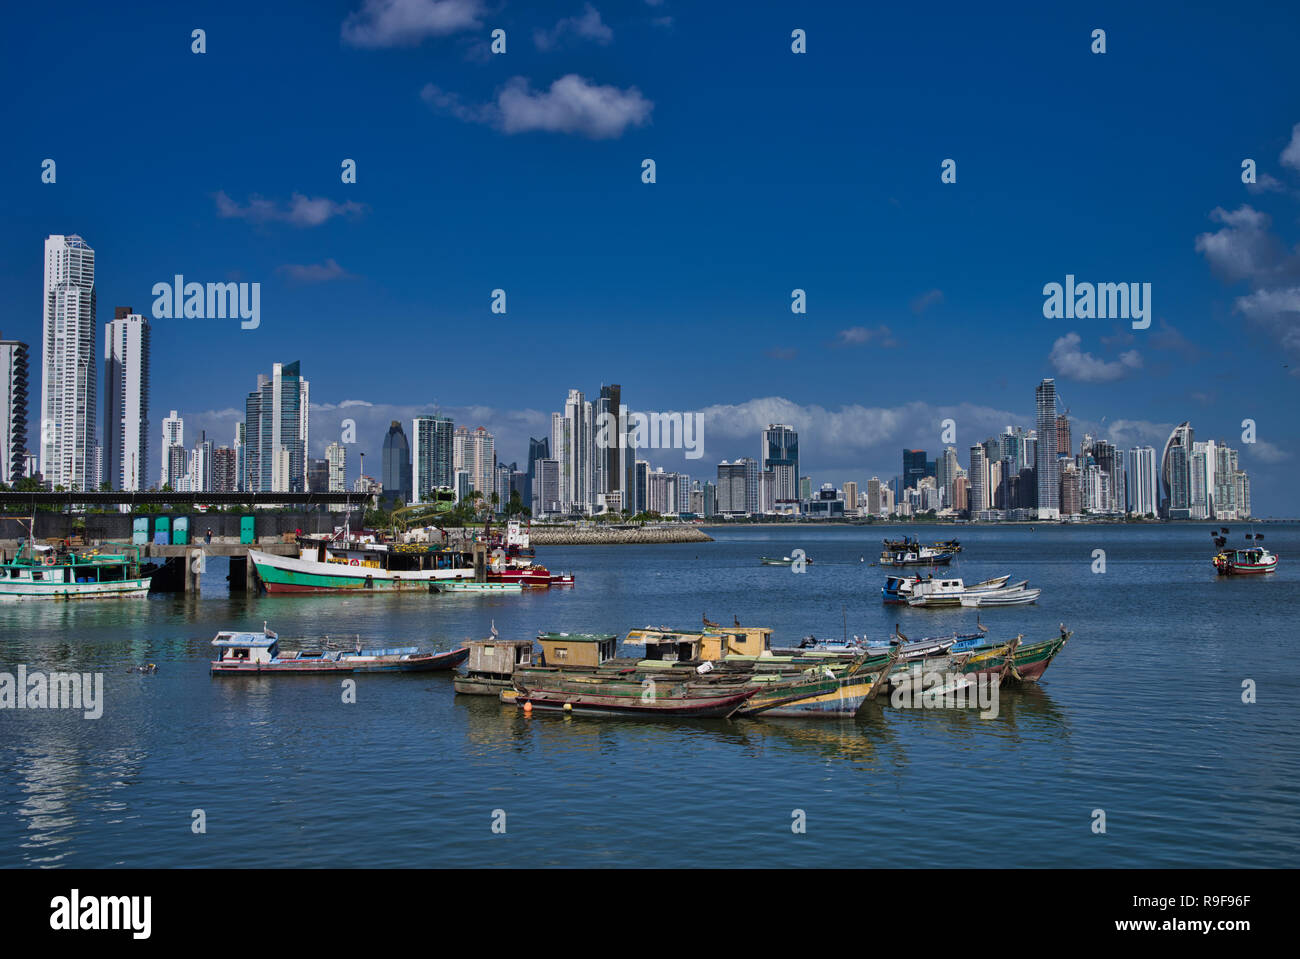 Panama City and fishing boats Costal Skyline with skyscrapers Stock Photo